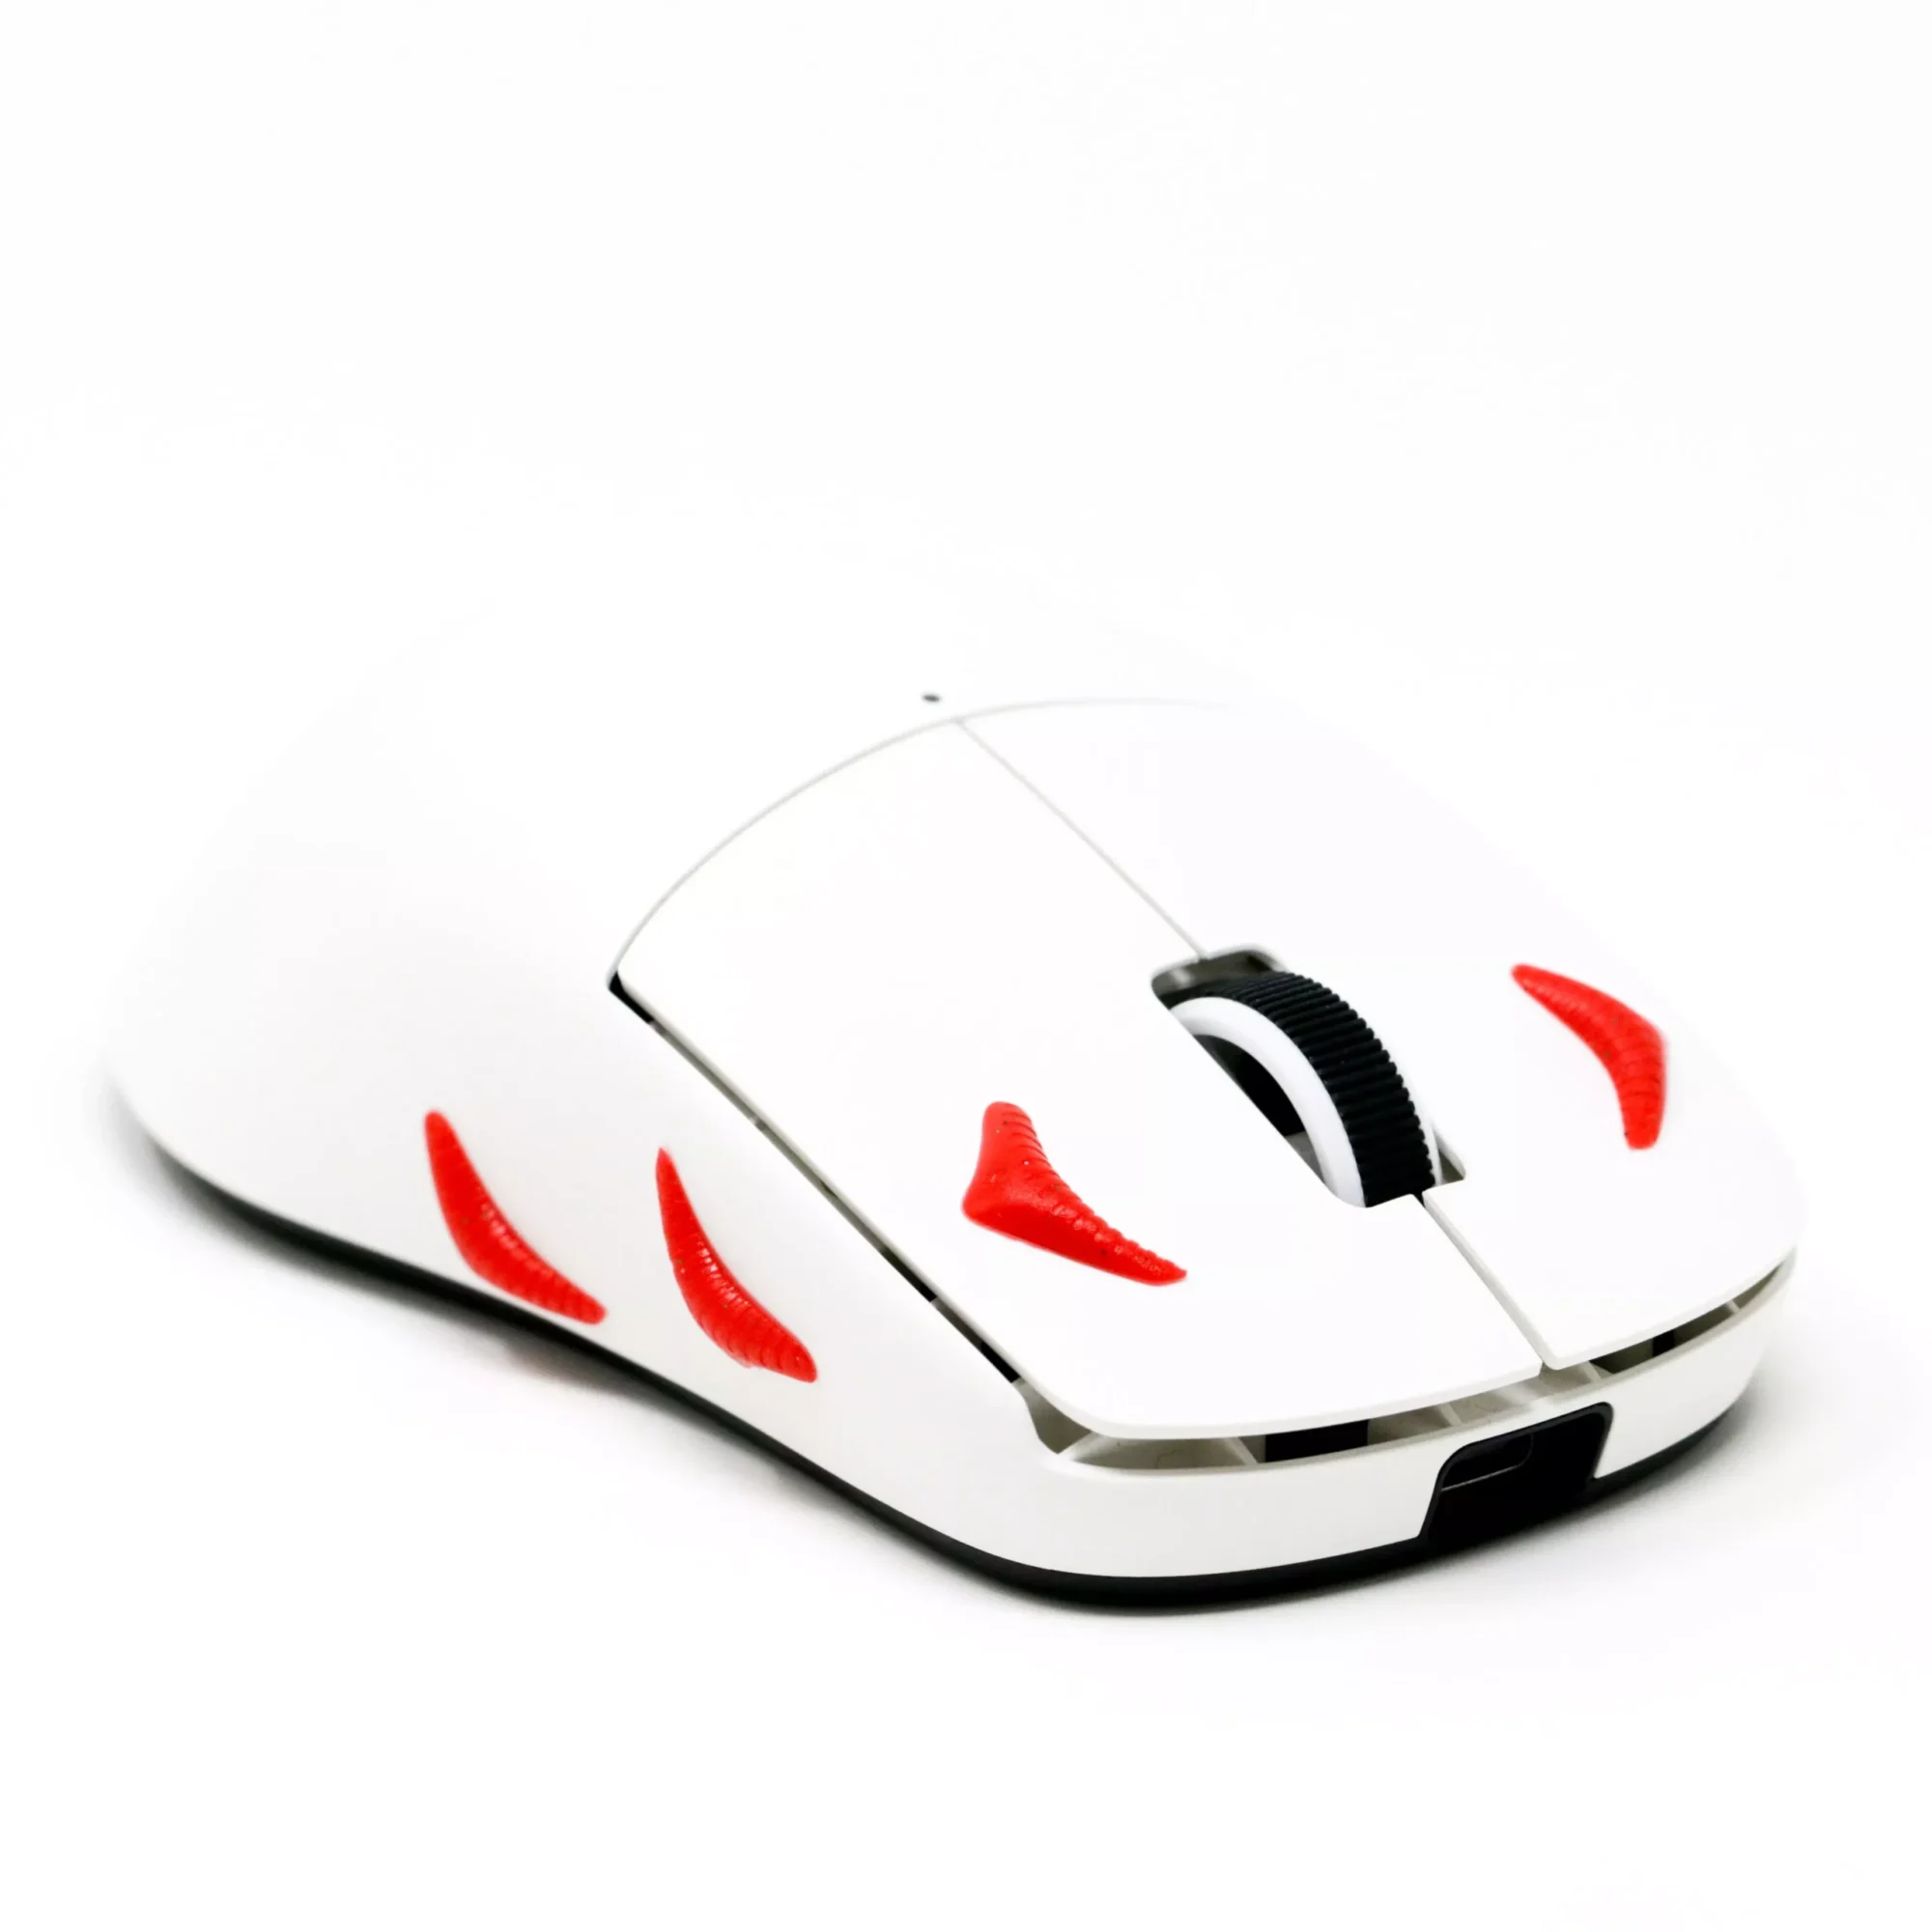 SoSpacer Red Mouse Grip